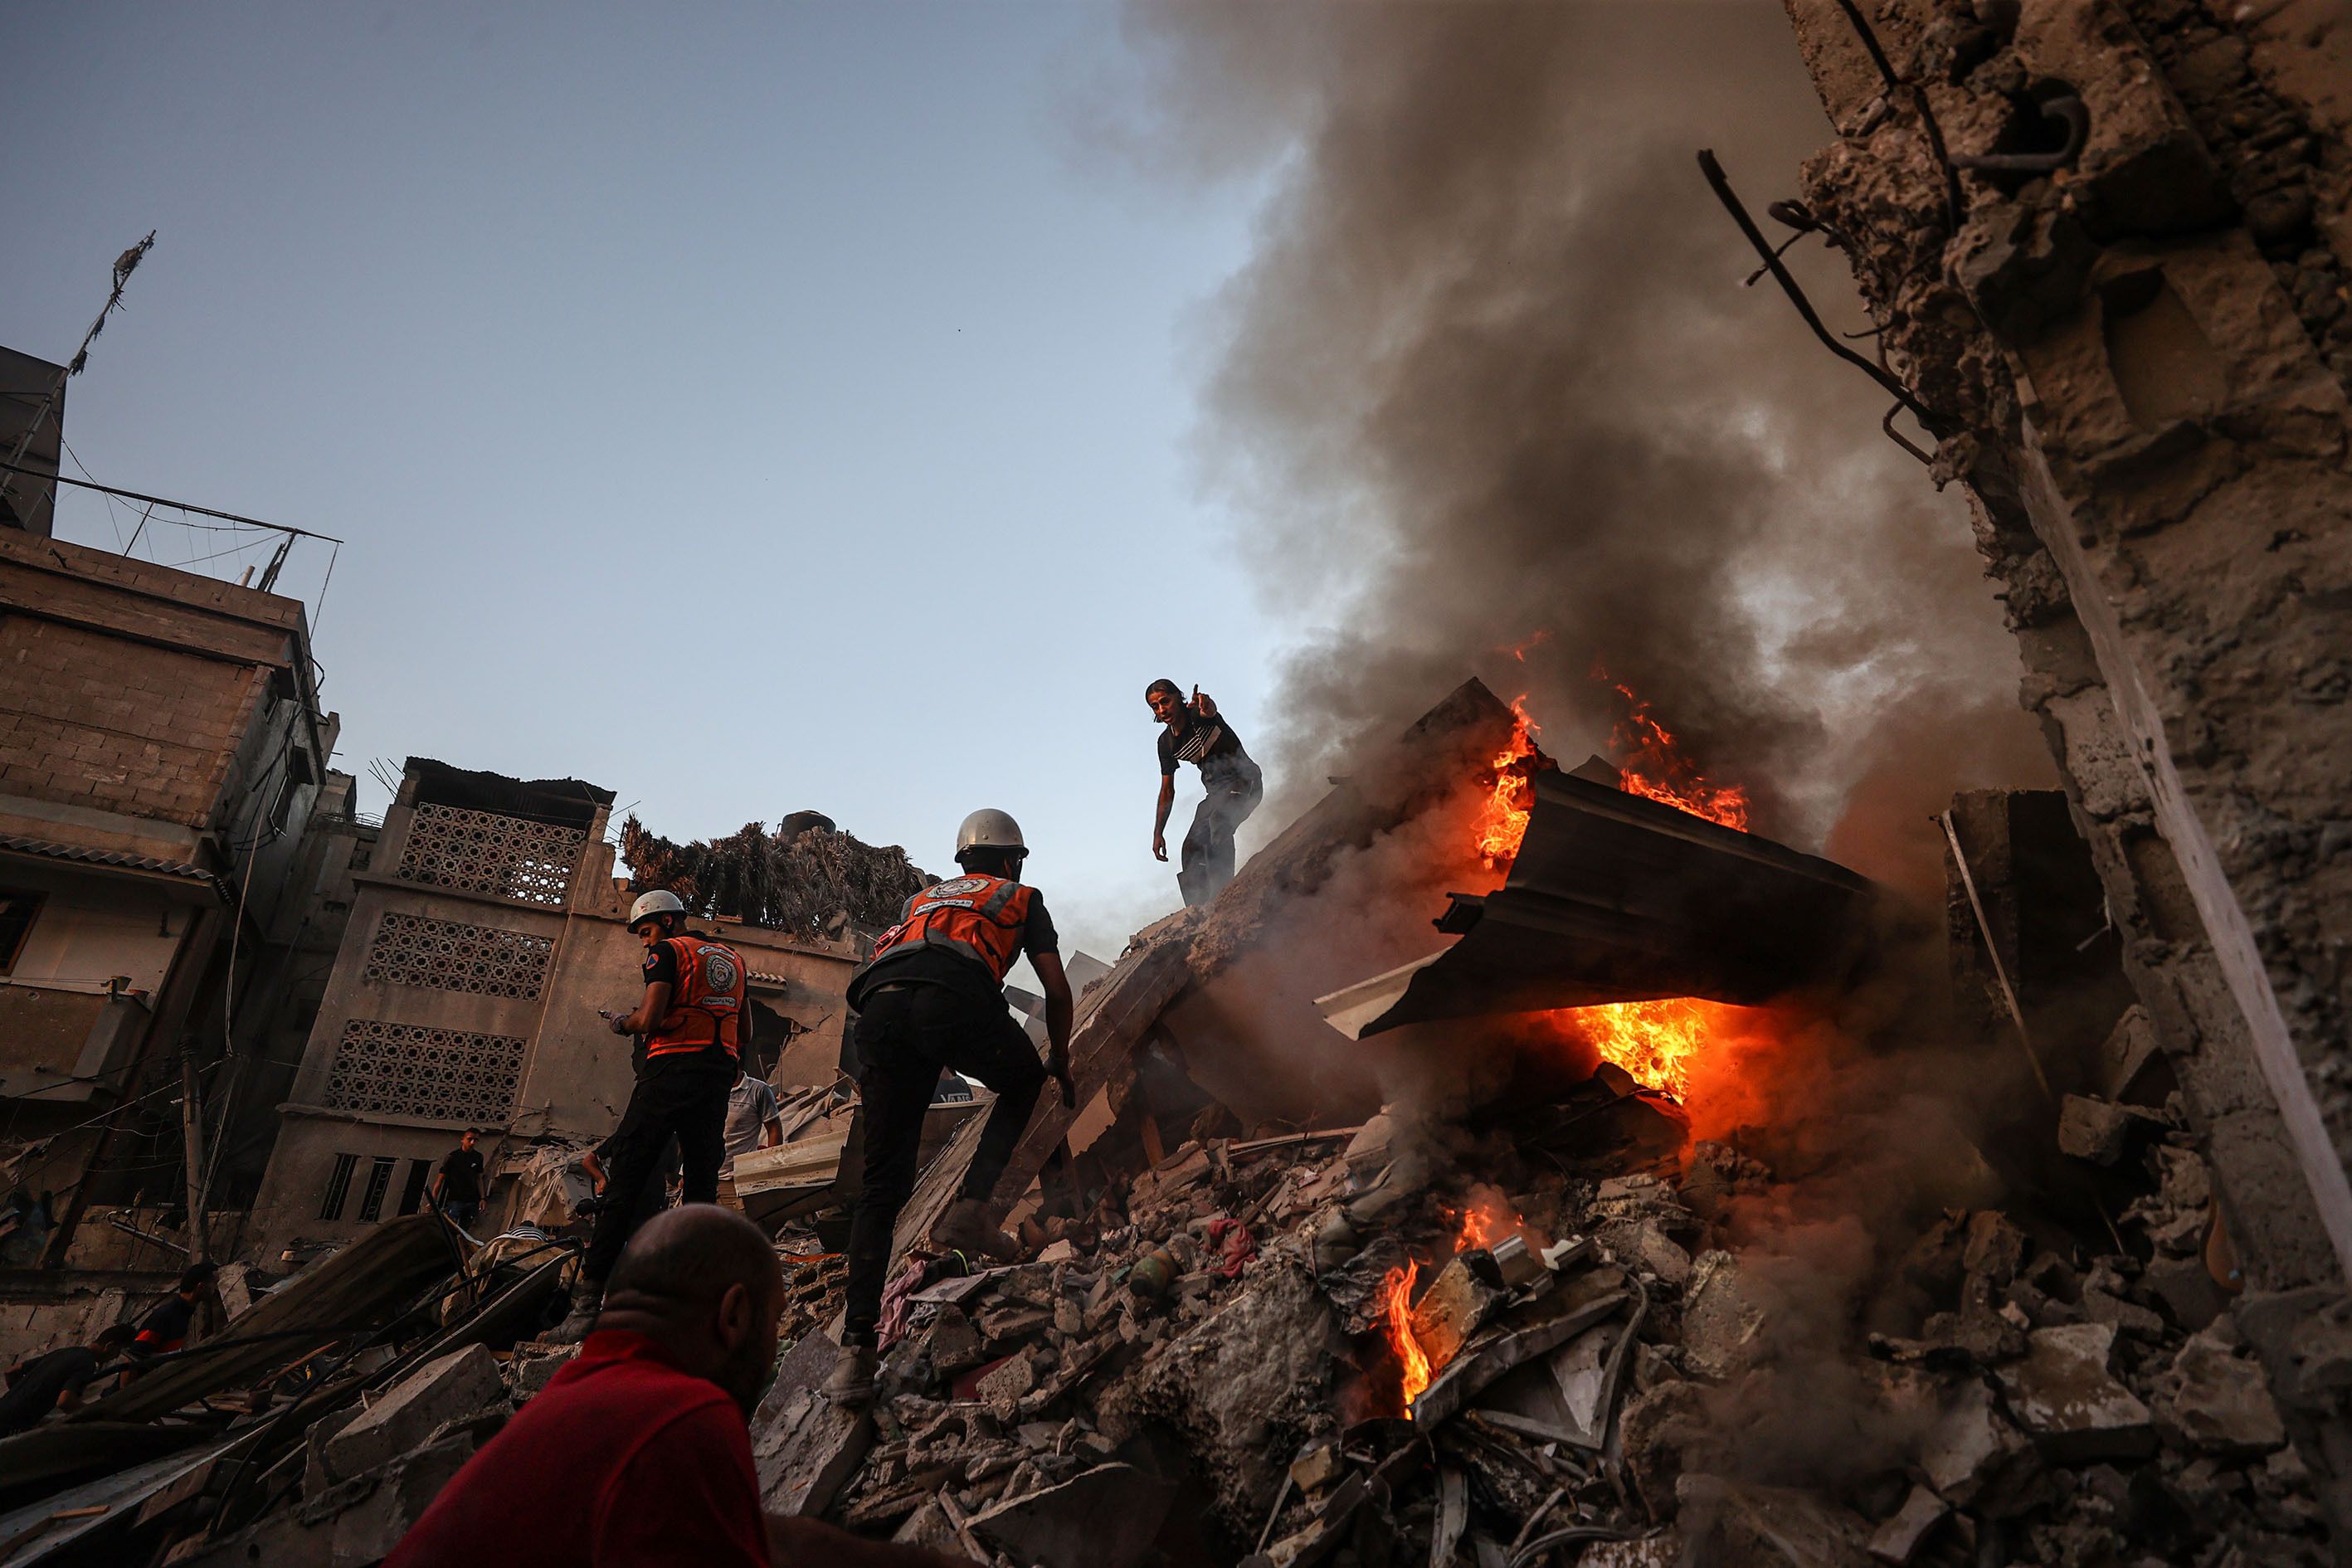 Teams put out a fire that broke out among the rubble of a destroyed building during search and rescue operations after an Israeli attack in Khan Younis, Gaza, on Saturday, November 4.